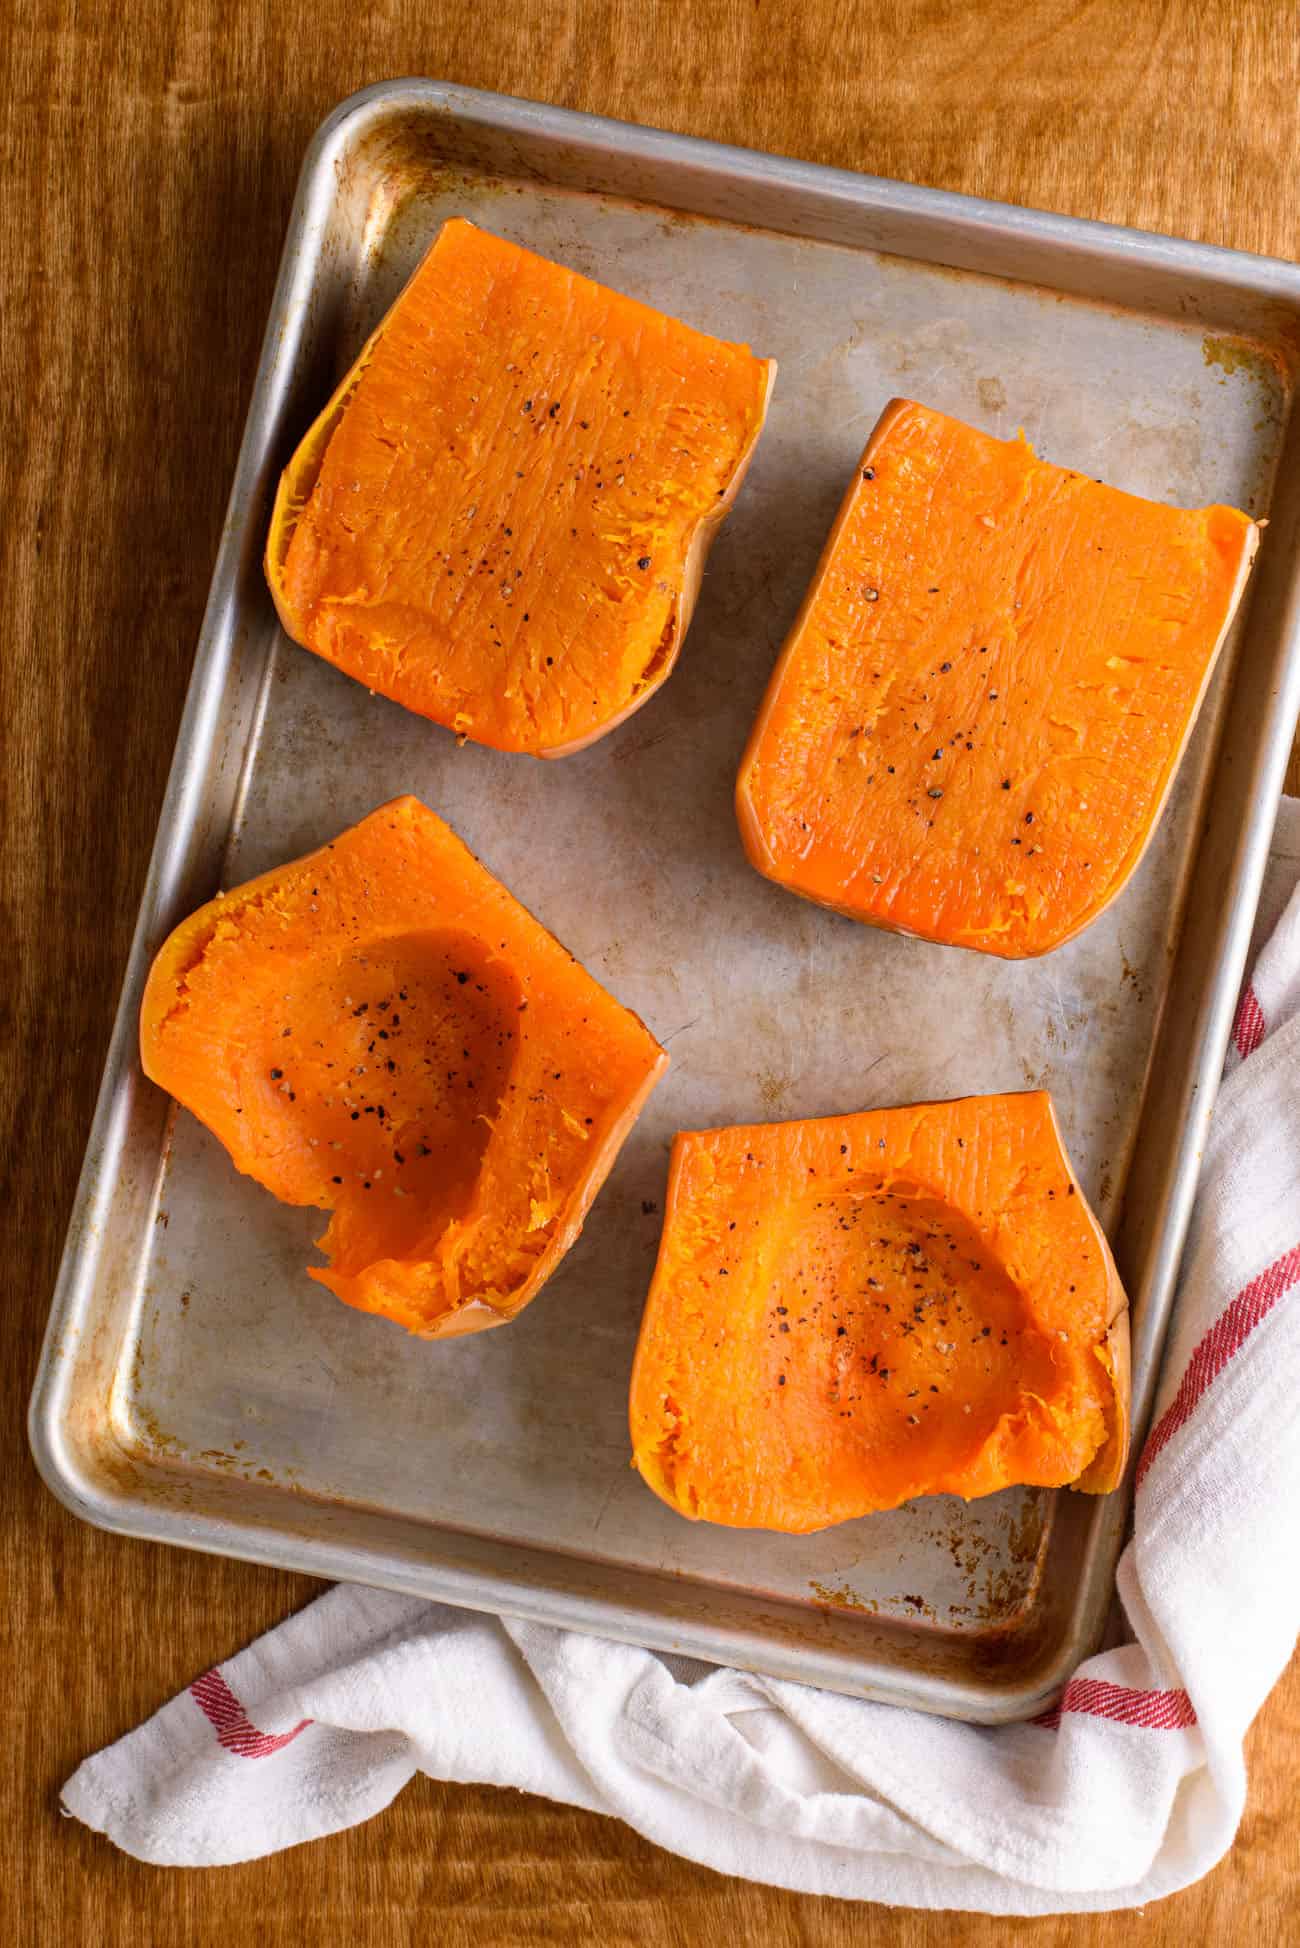 Roasted butternut squash on a baking sheet on a wooden table